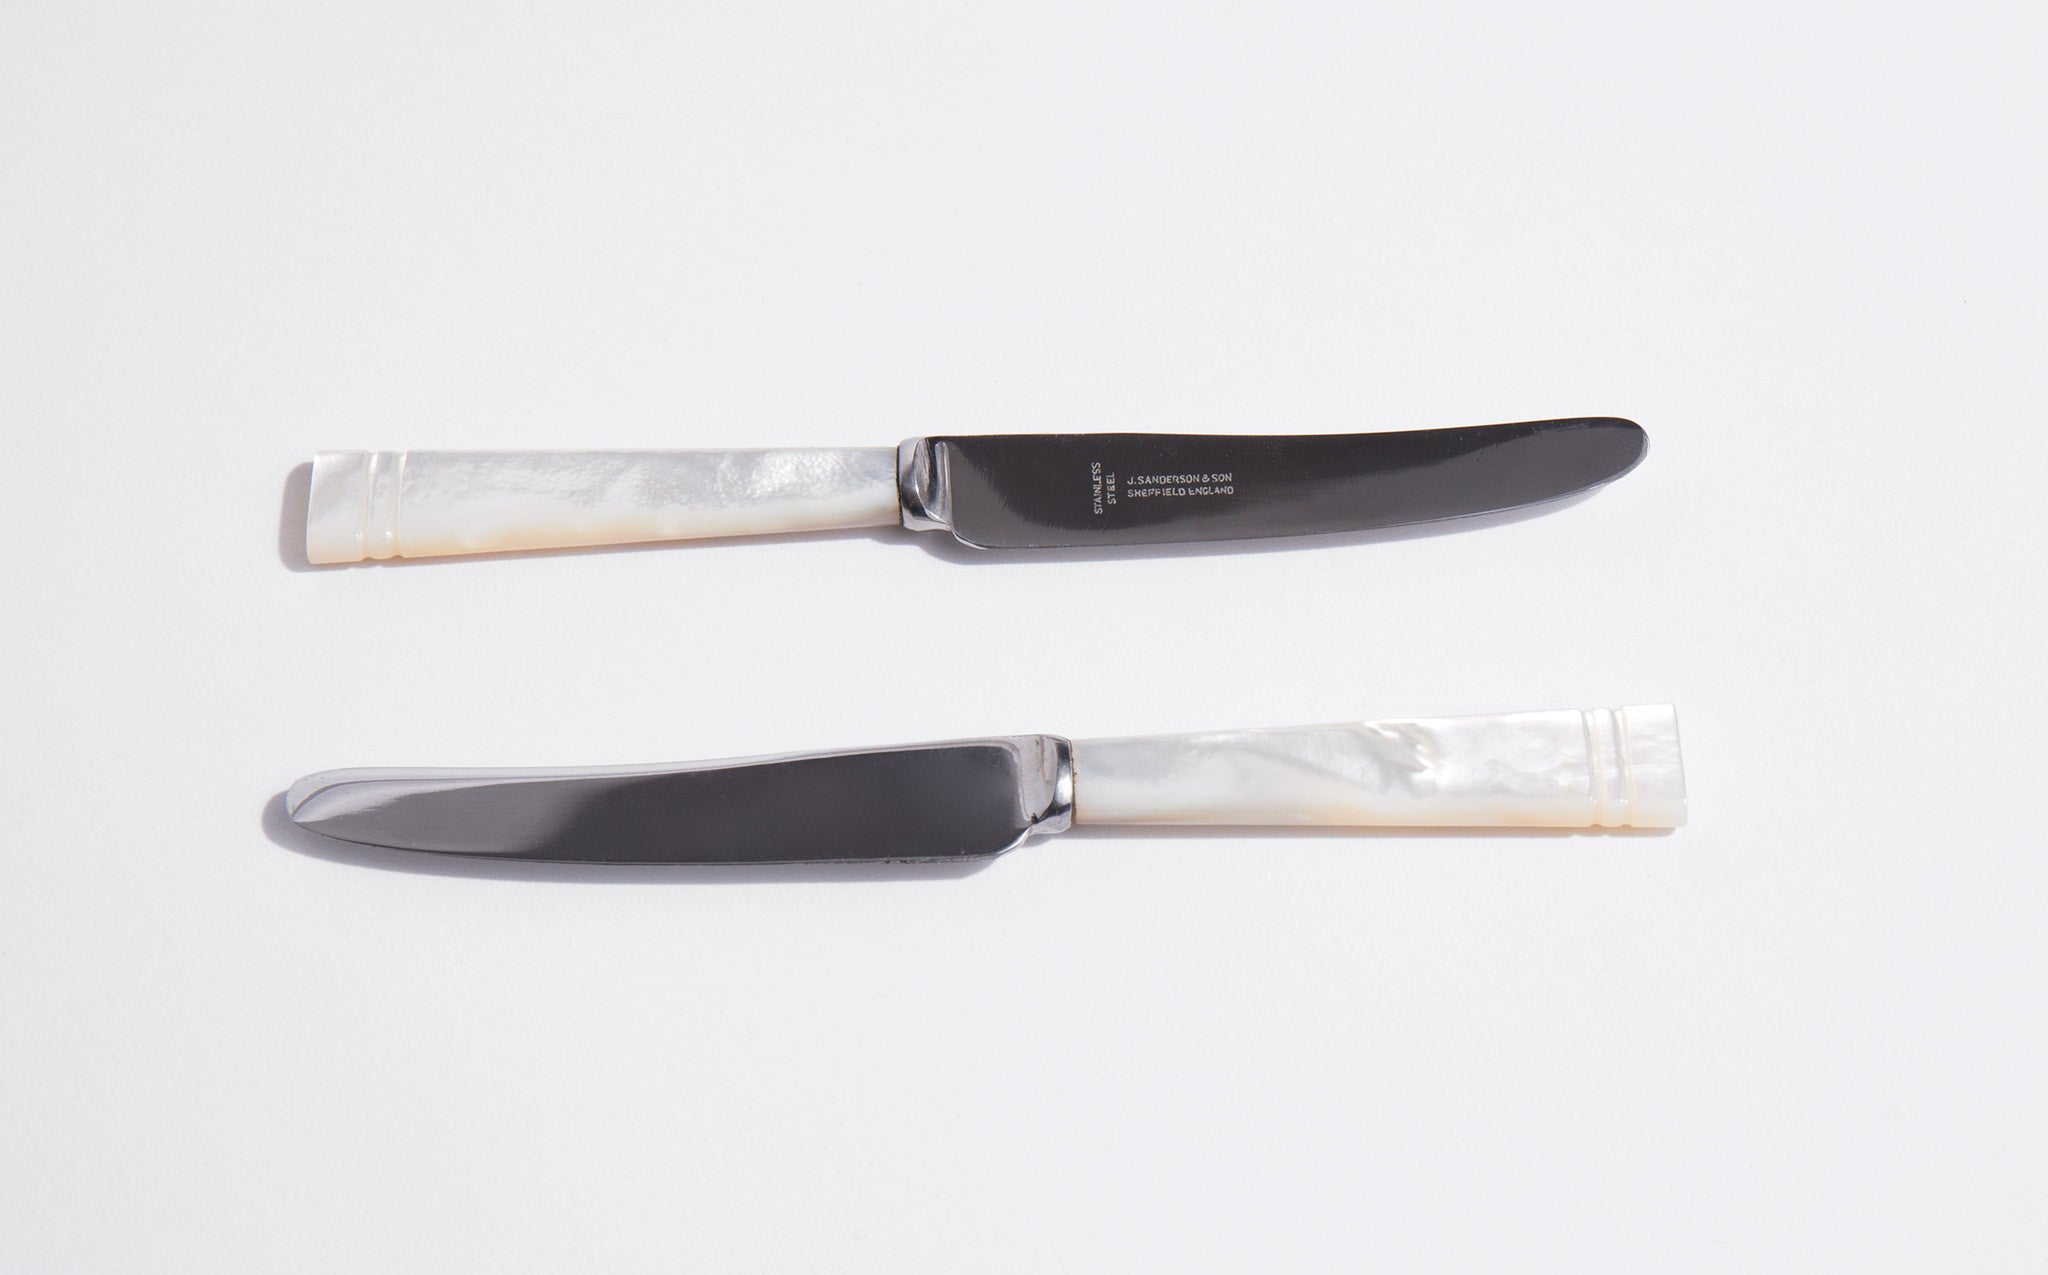 Stainless Steel Serrated Knives With Pearl Handle. Sheffield